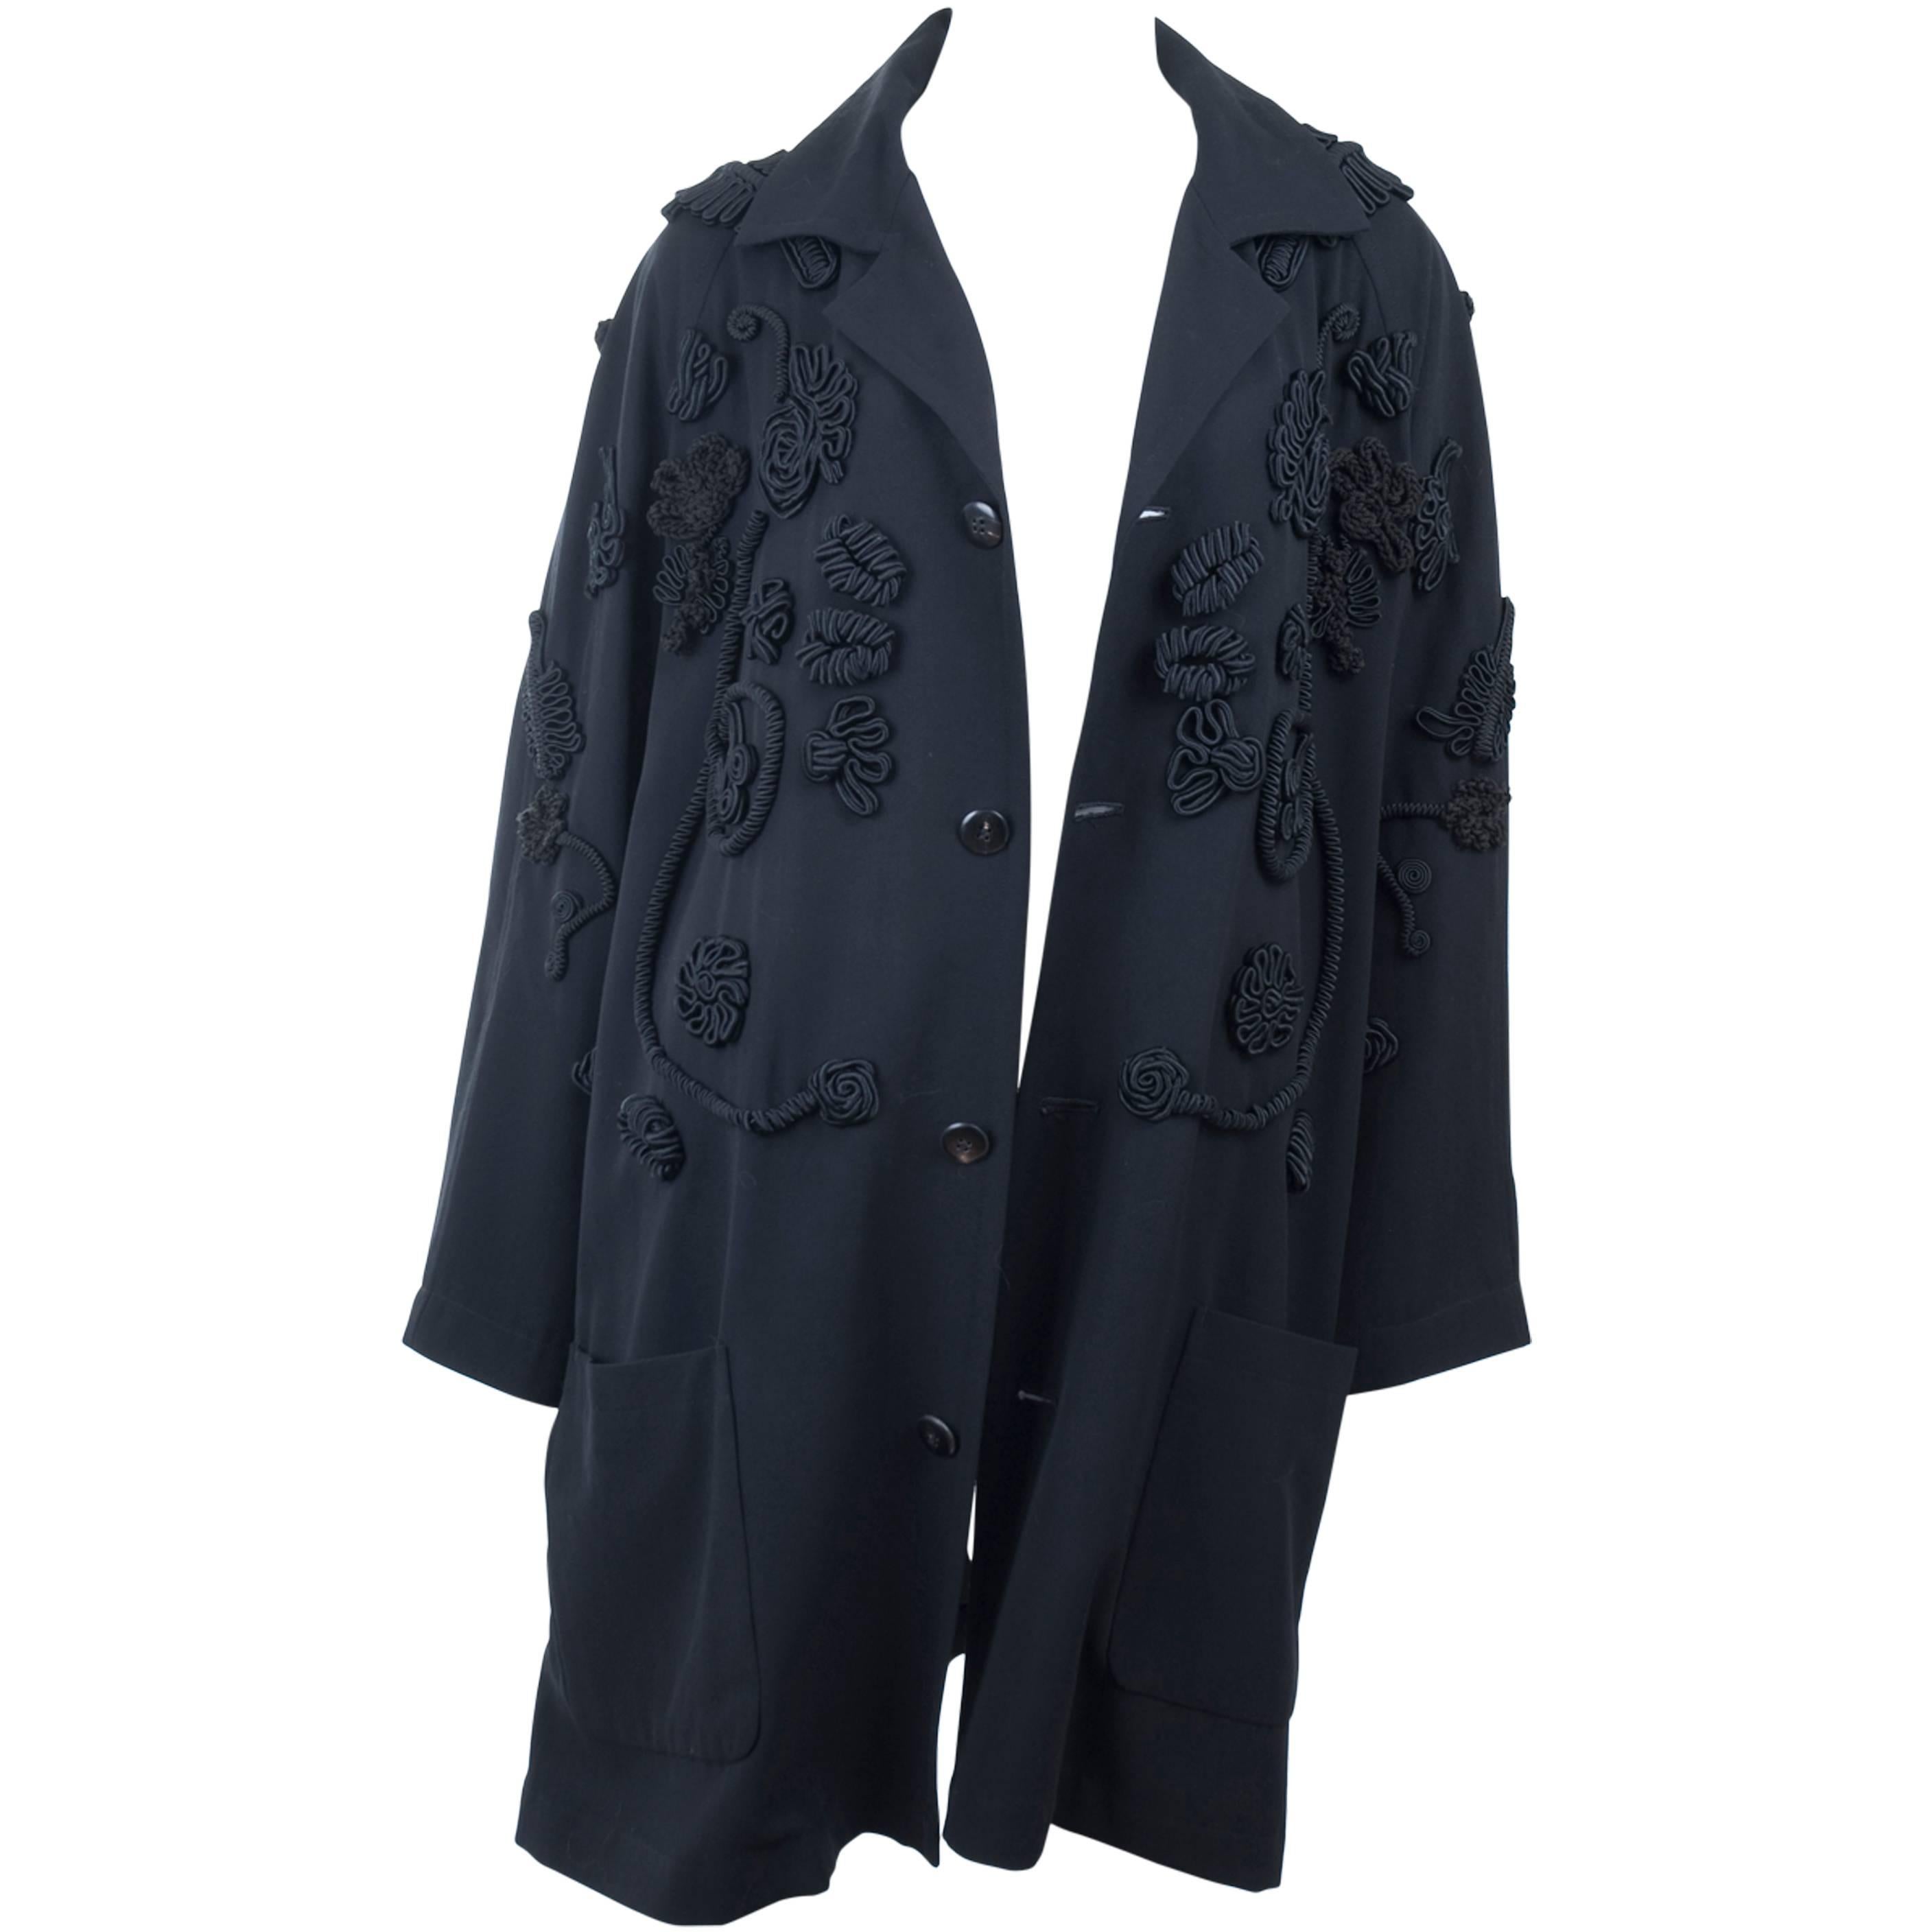 90's Yohji Yamamoto Black Coat with Corded Embroidery + Tassels Allover. For Sale